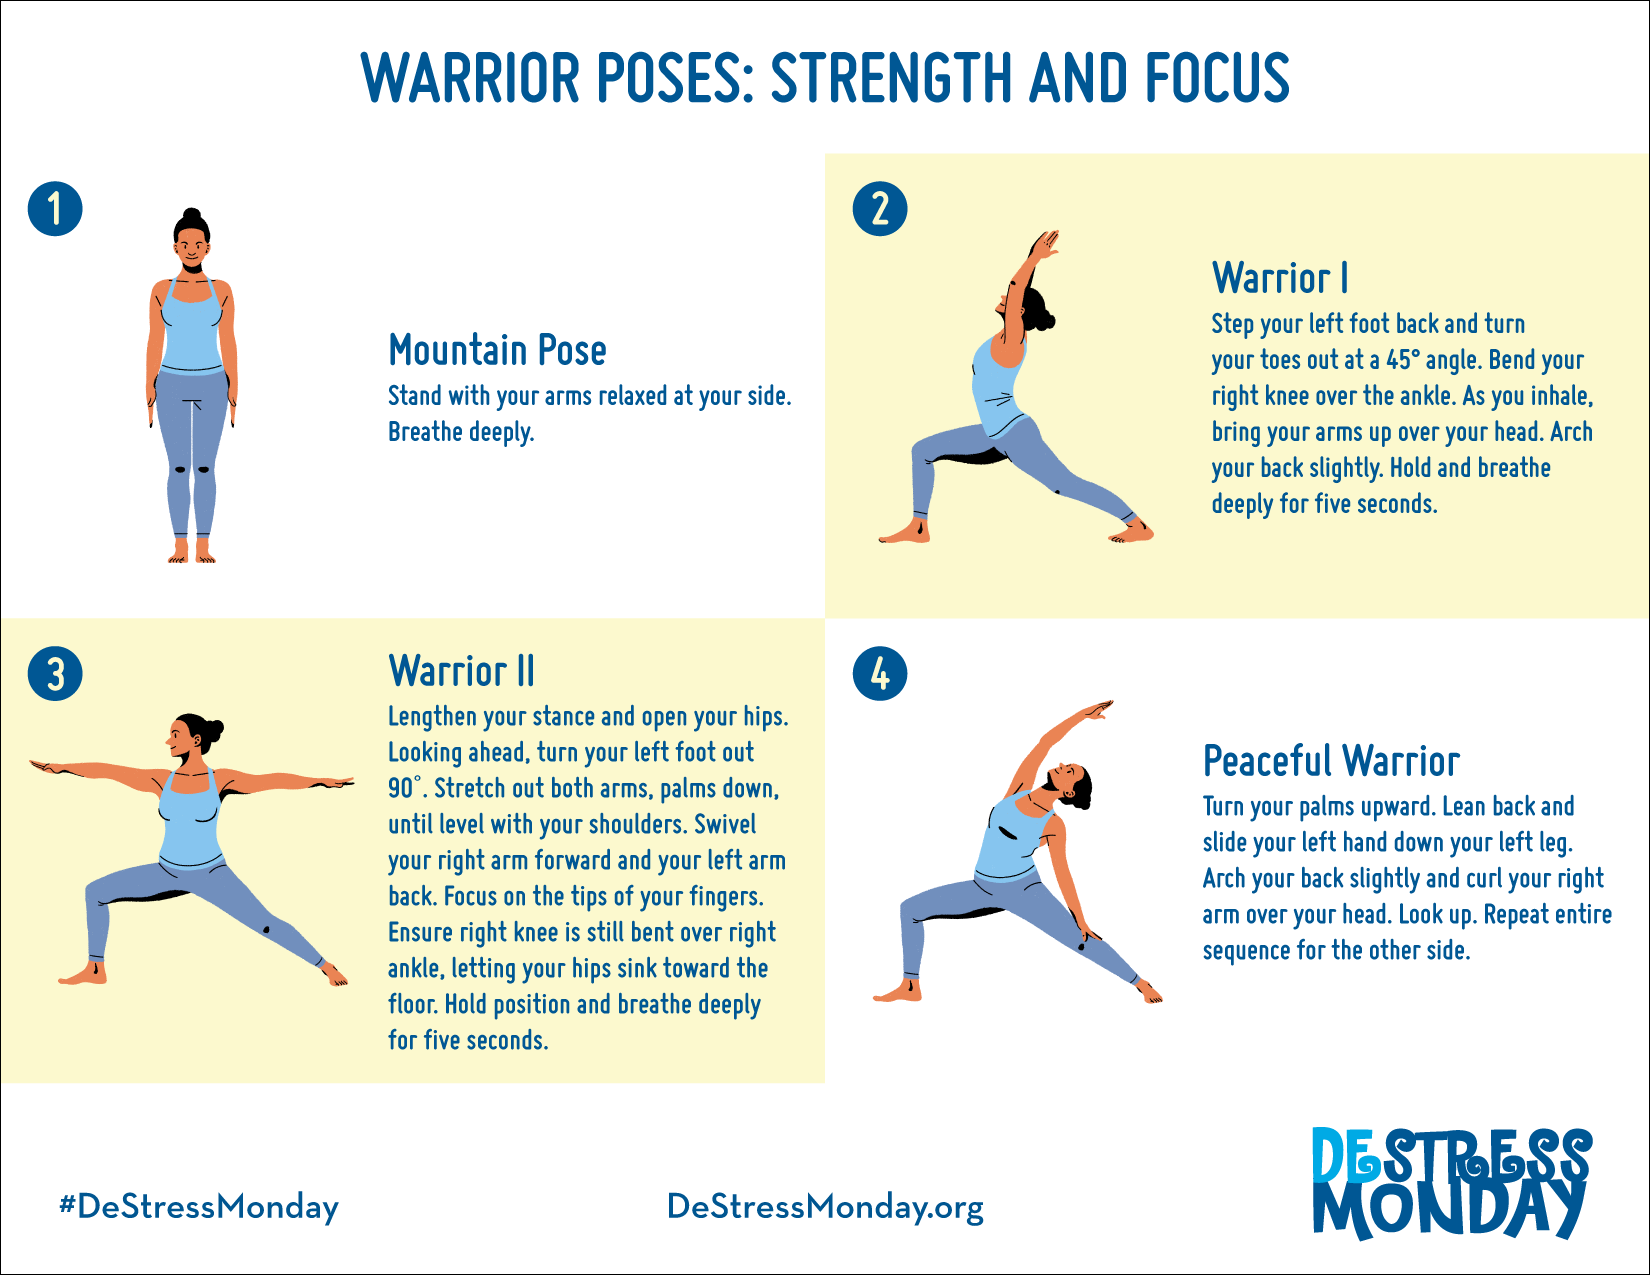 Yoga poses to do before bed for a better night's sleep - Aroga Yoga